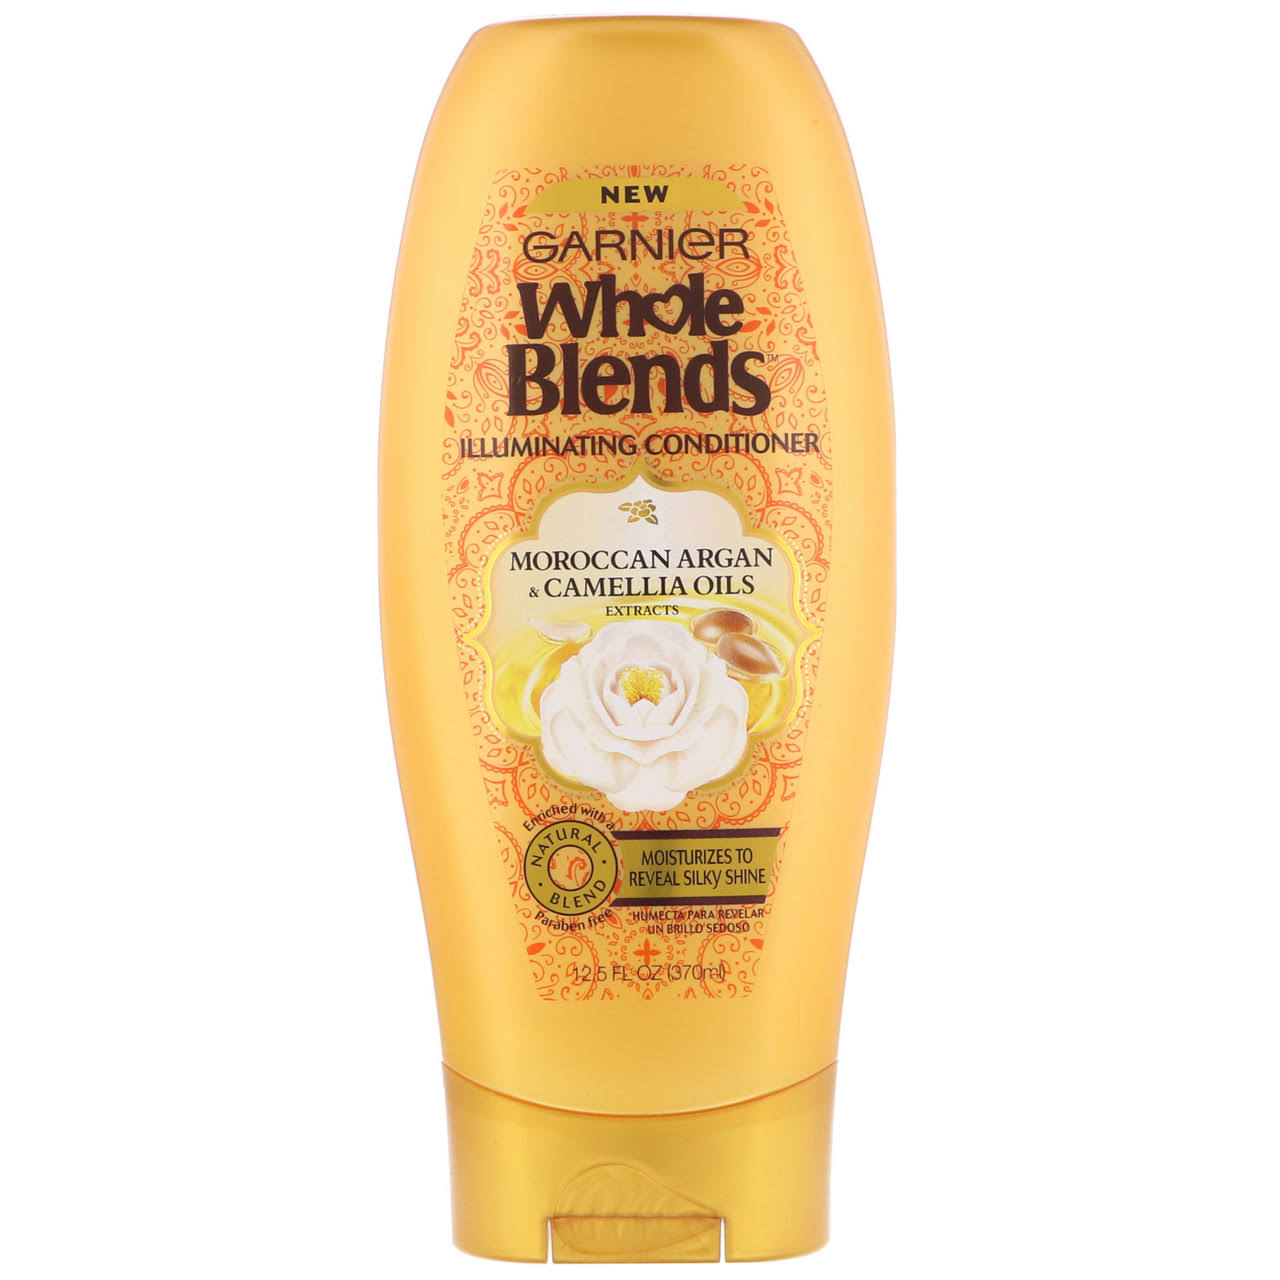 Garnier Whole Blends Illuminating Conditioner Moroccan Argan and Camellia Oils Extracts - 12.5oz